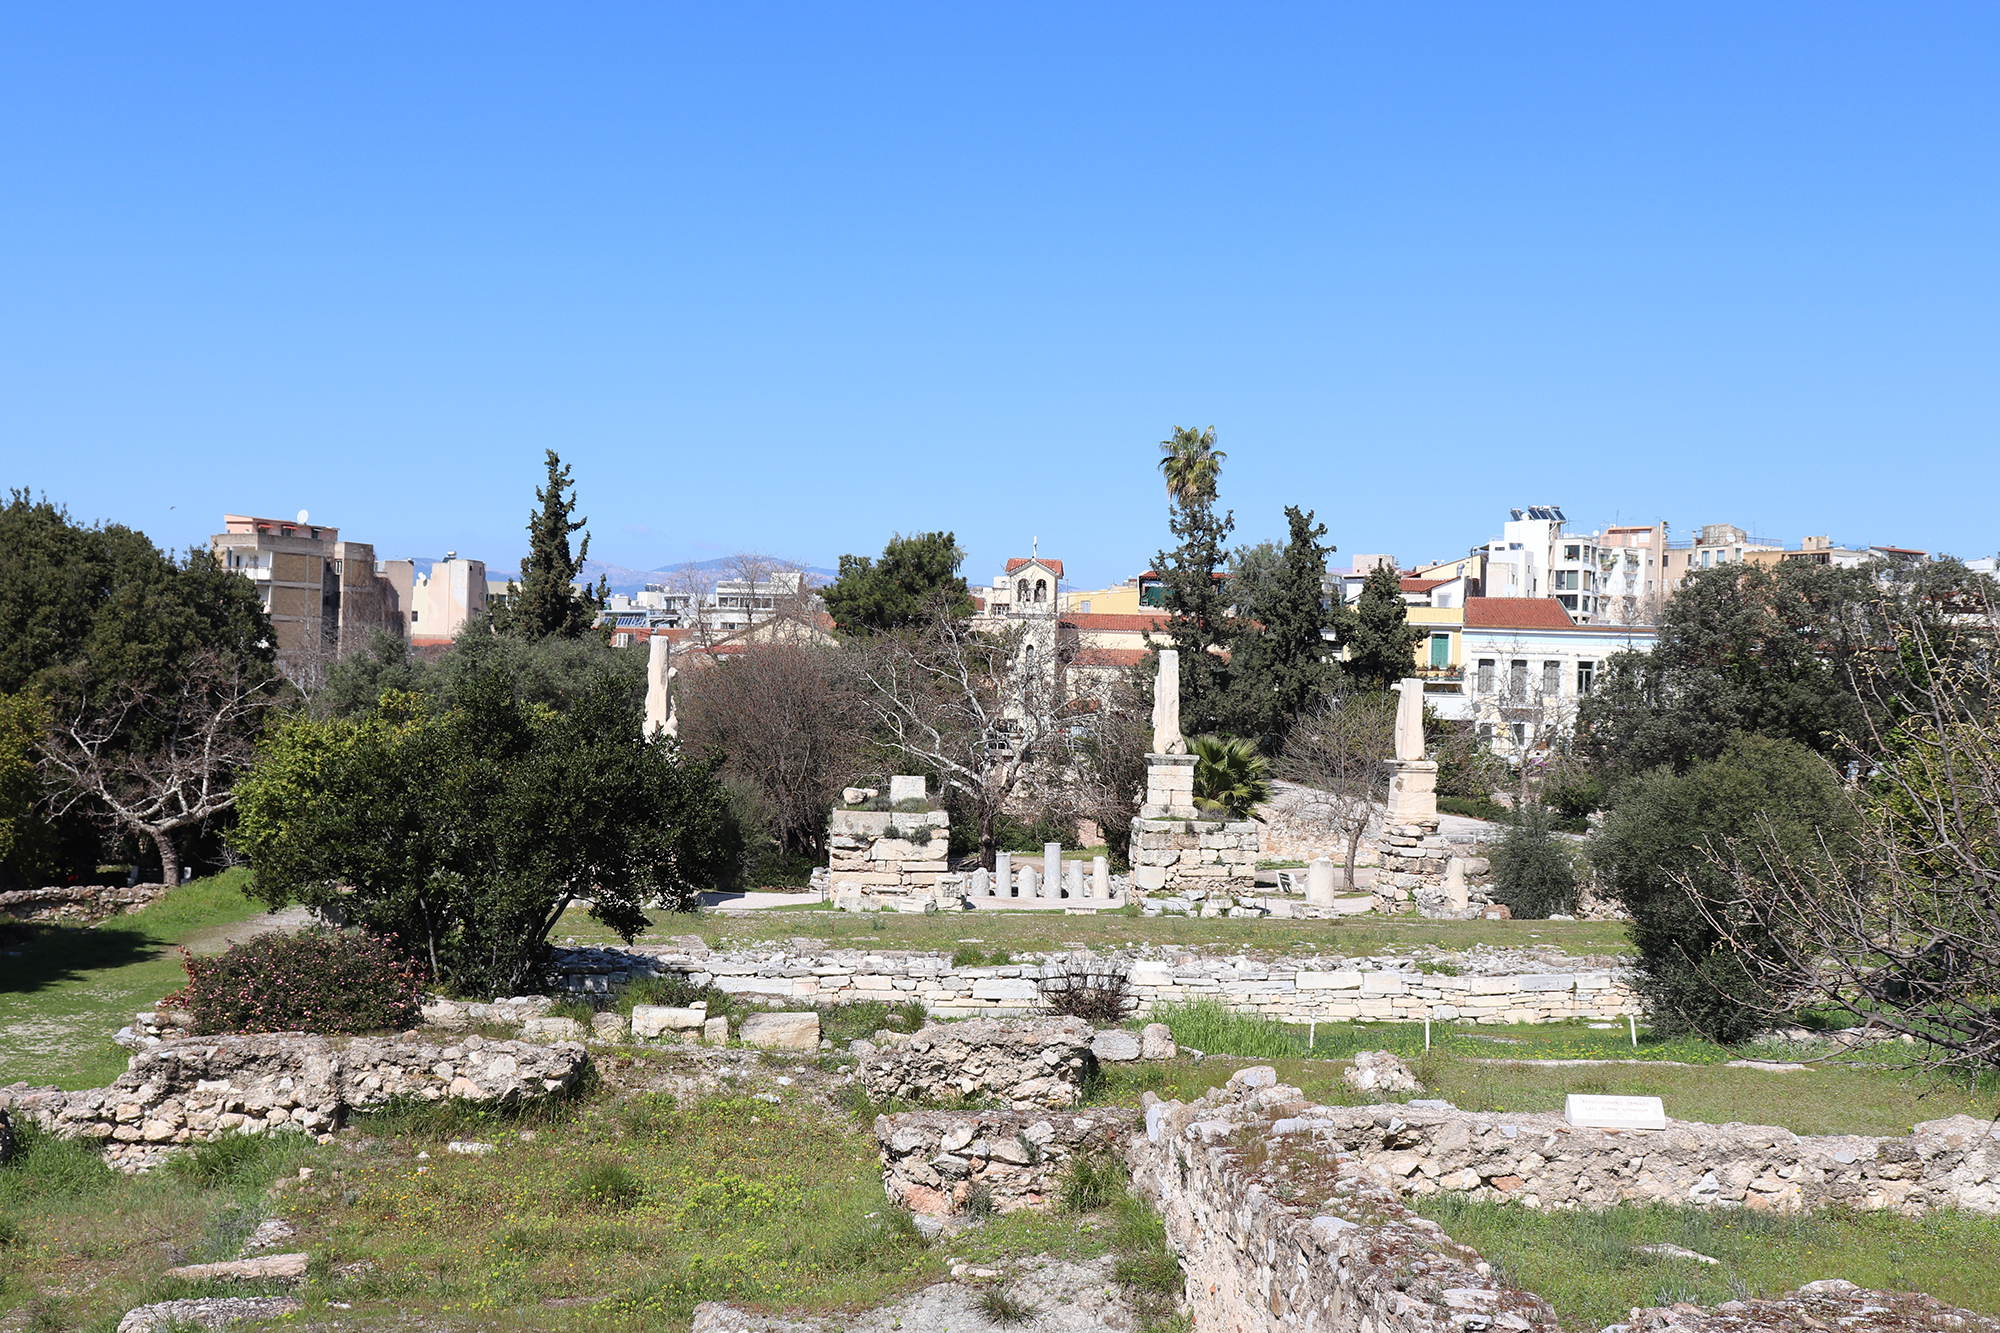 View of Athens from the Agora. March 2020. Source: John Bingham-Hall